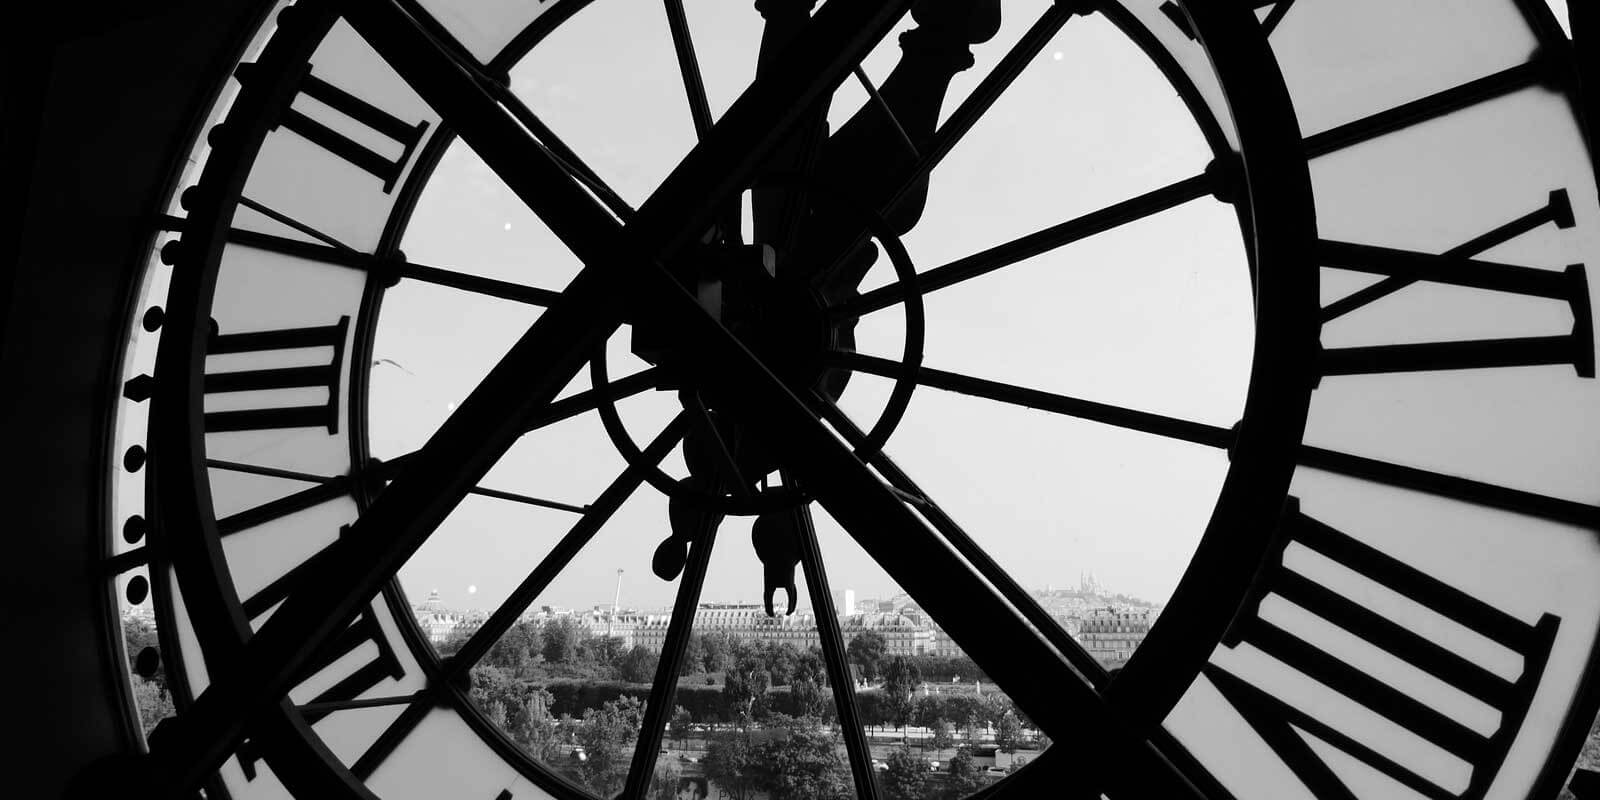 Closeup of the giant clock-slash-window from inside Musée d'Orsay in Paris, France.